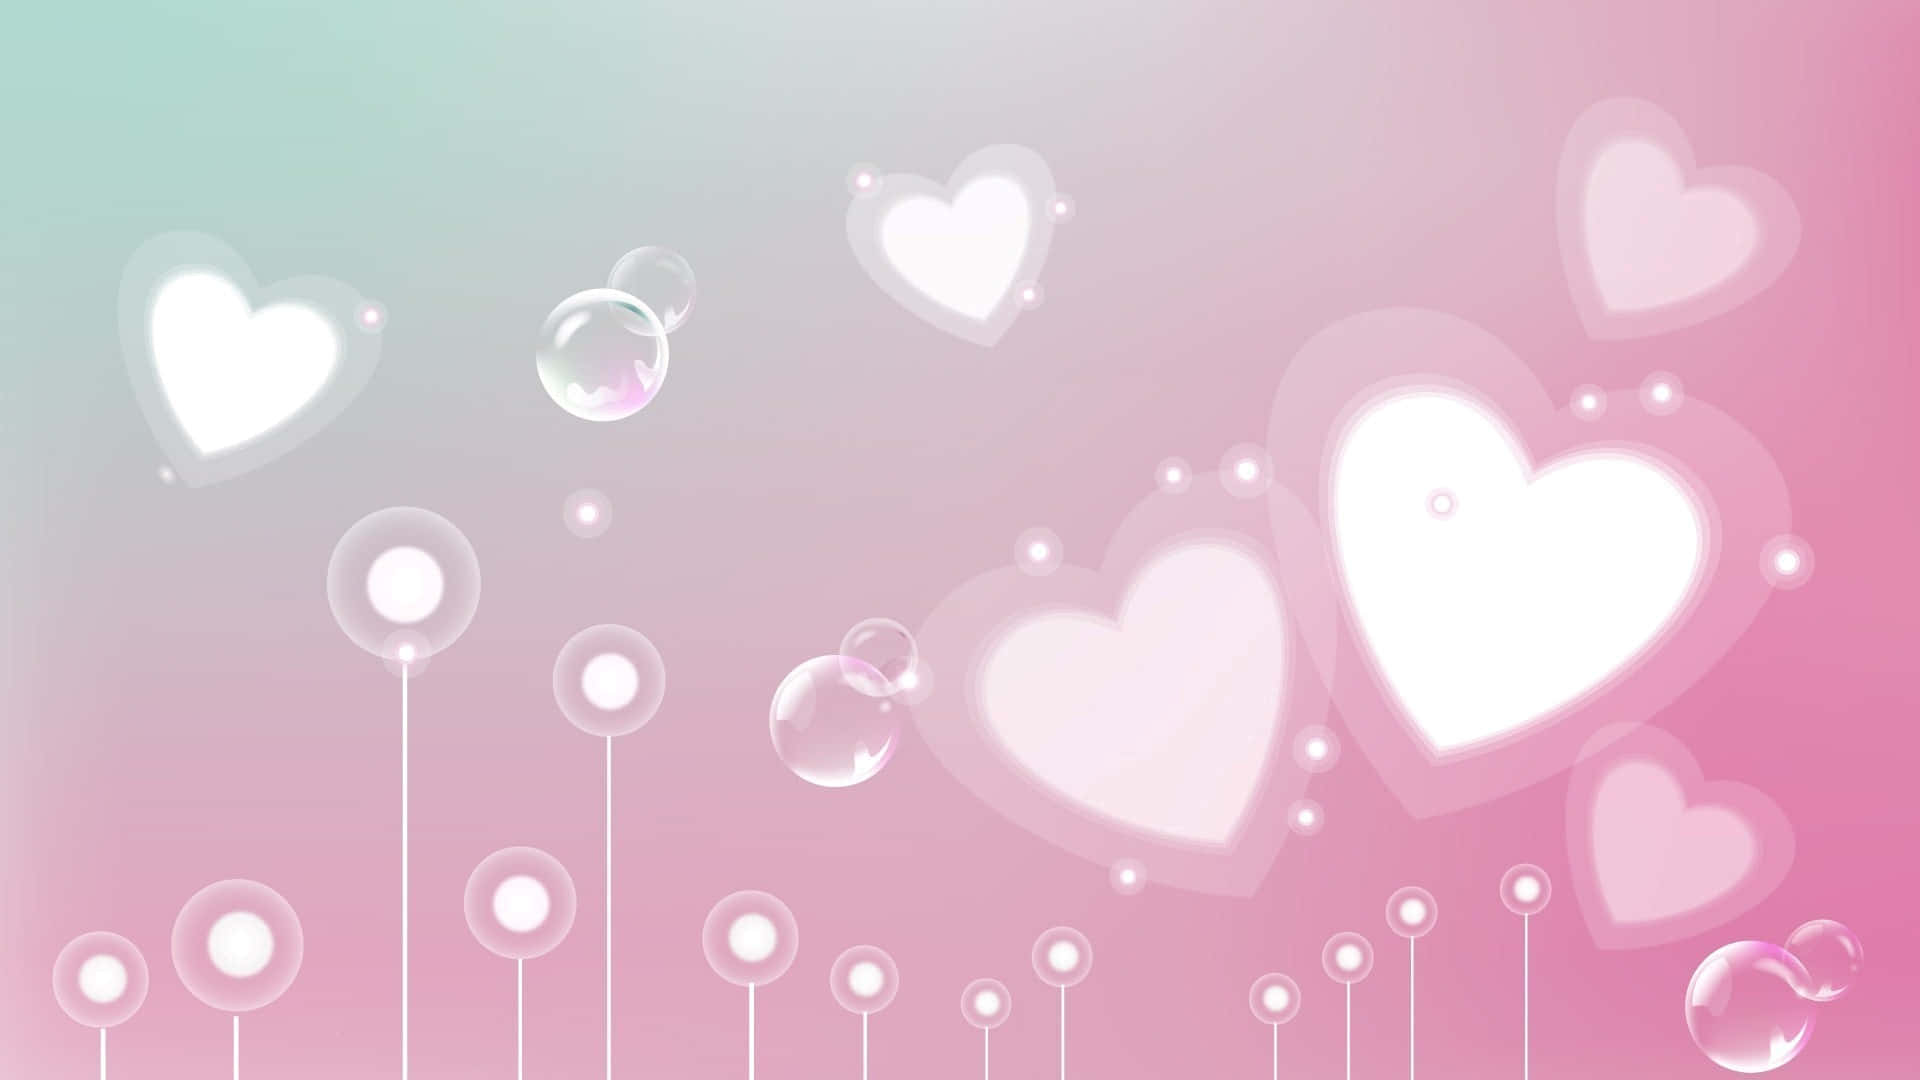 A Pink And White Background With Hearts And Bubbles